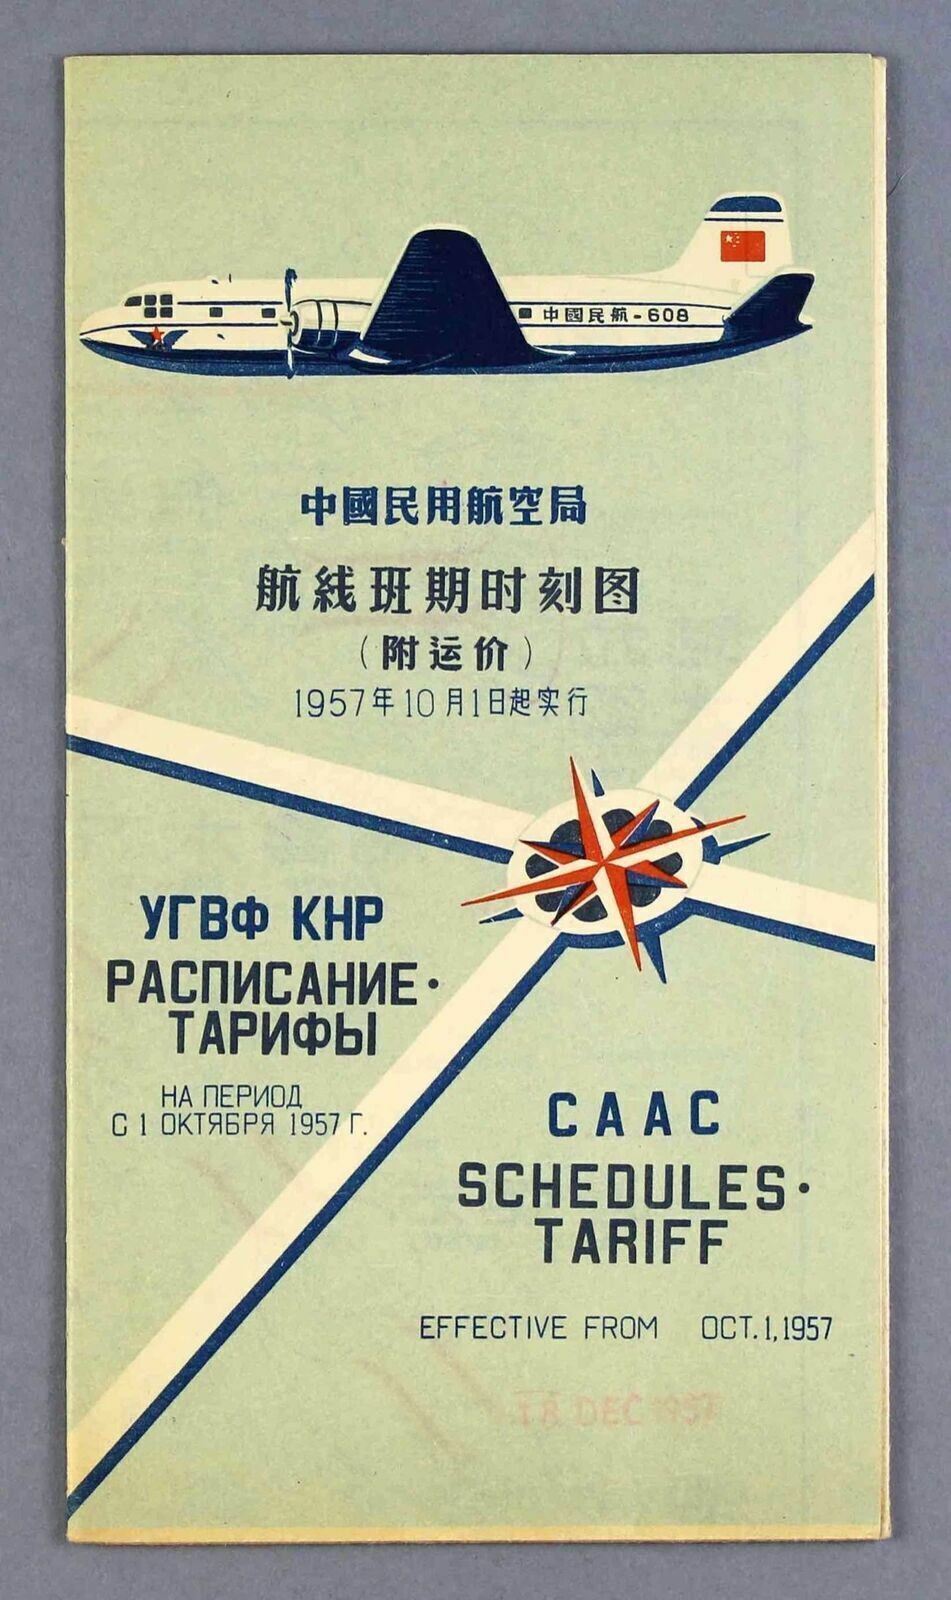 CAAC AIRLNE TIMETABLE OCTOBER 1957 CIVIL AVIATION ADMINISTRATION OF CHINA